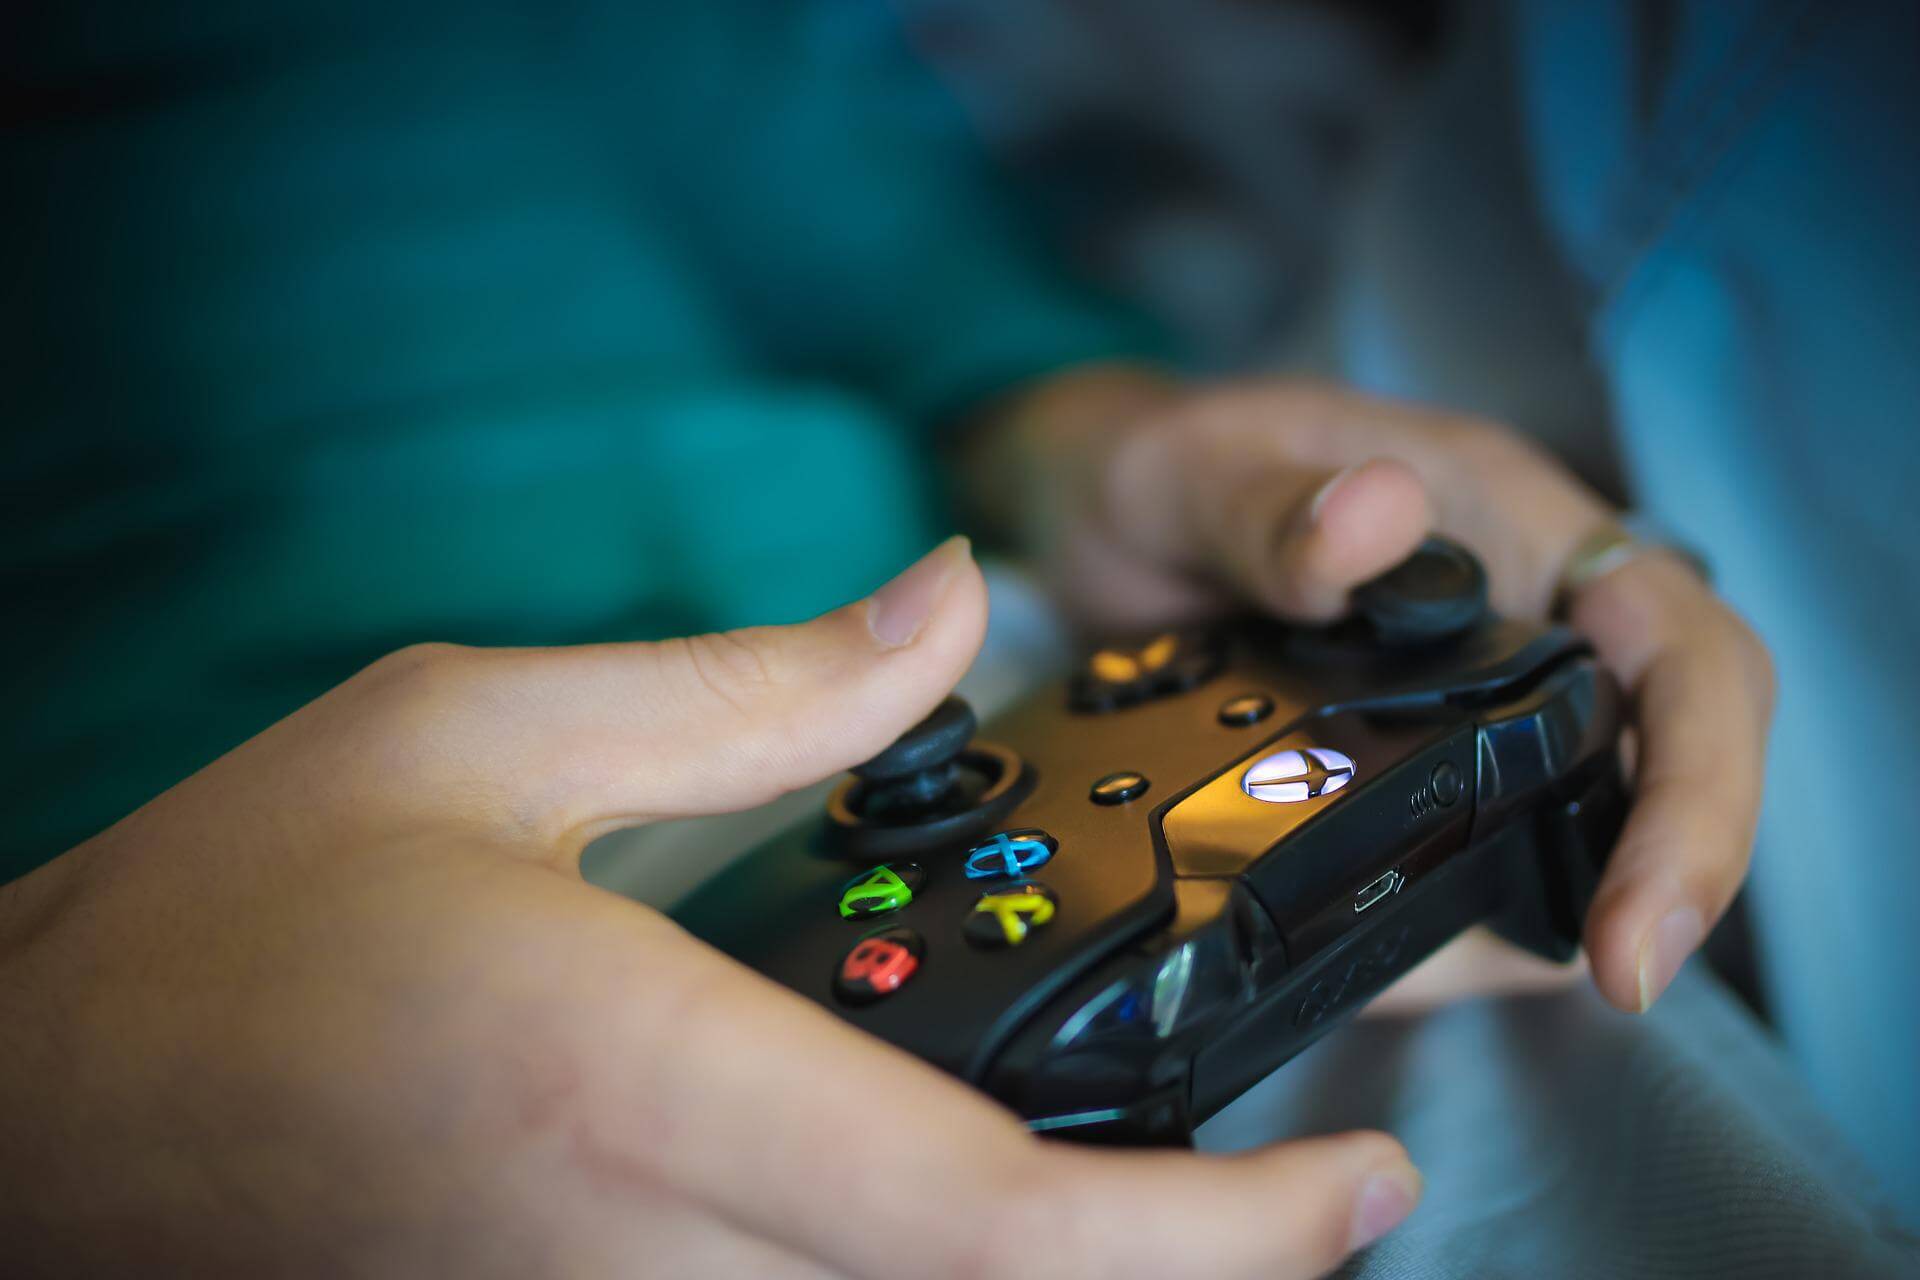 Study shows Gamers have better Brain power than Non-Gamers